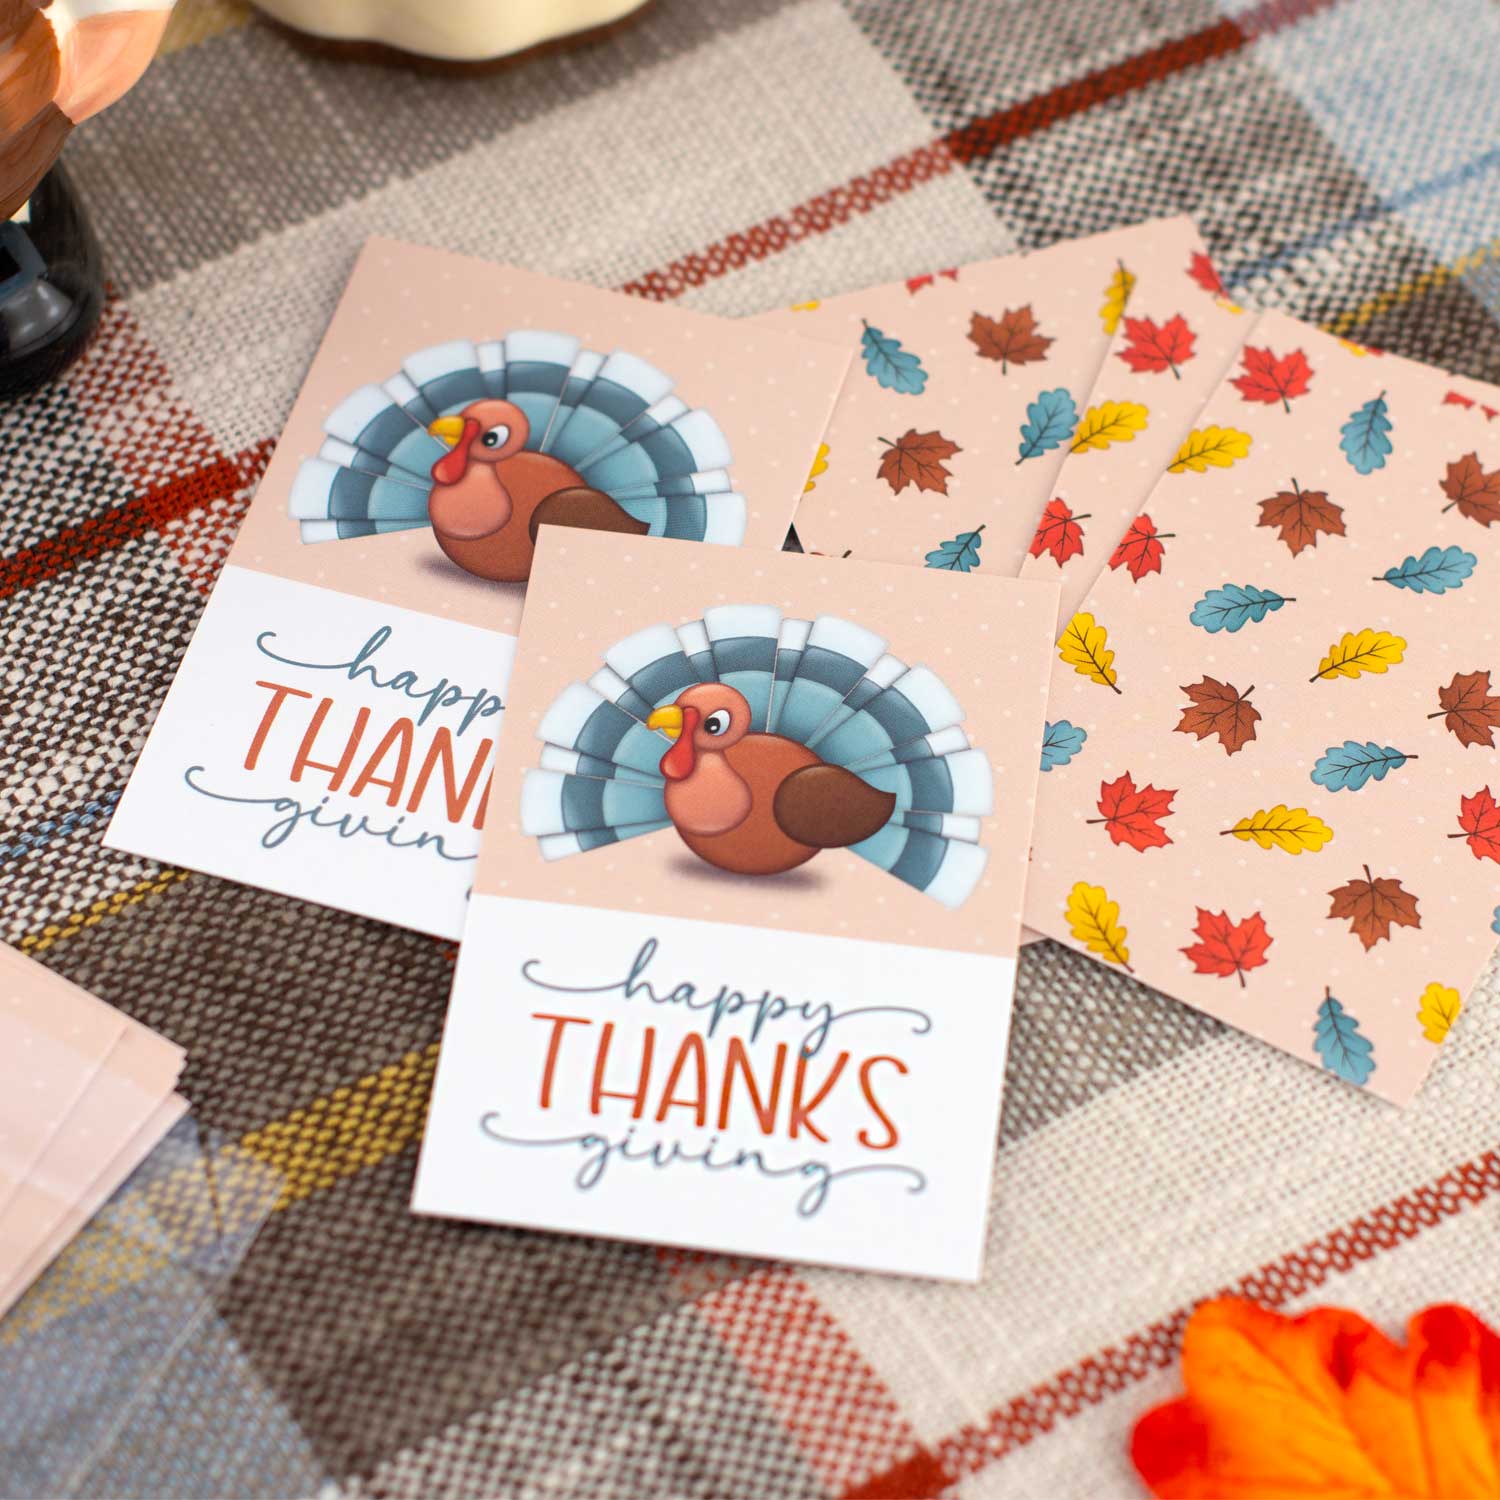 Happy Thanksgiving Turkey Platter 2" x 3" Tag - Pack of 25